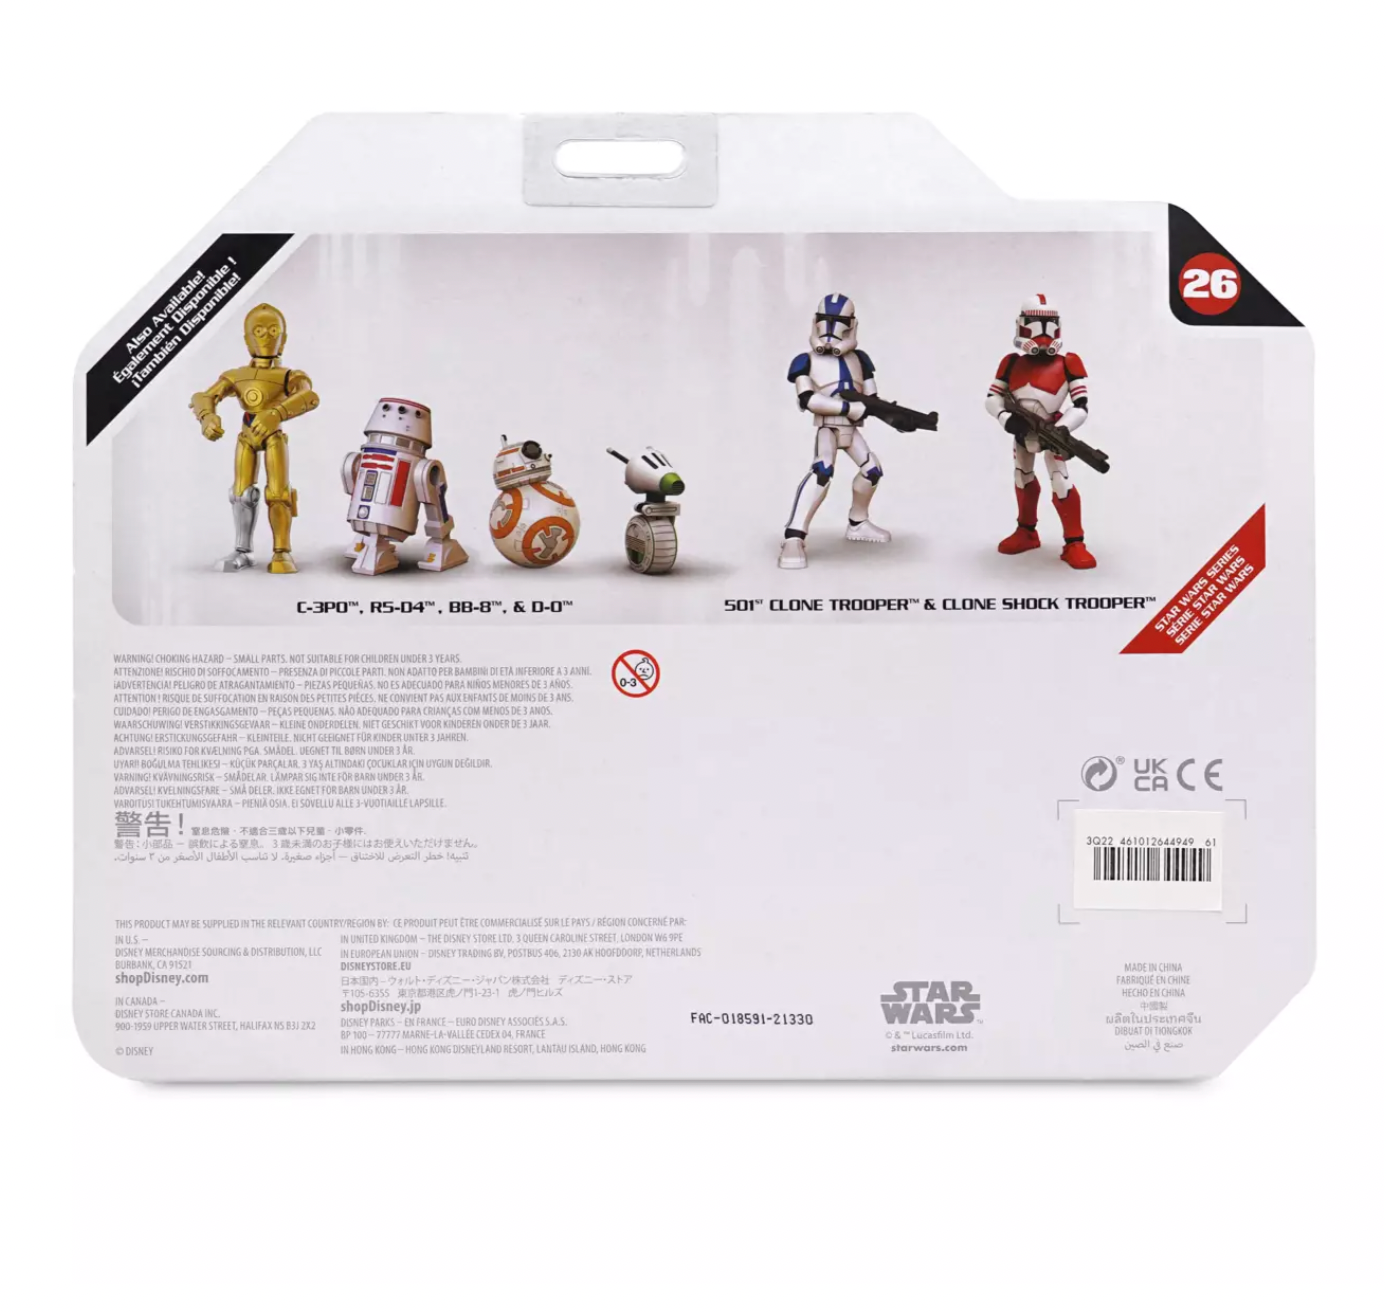 Disney Star Wars Droid Action Figure Set Toybox New with Box